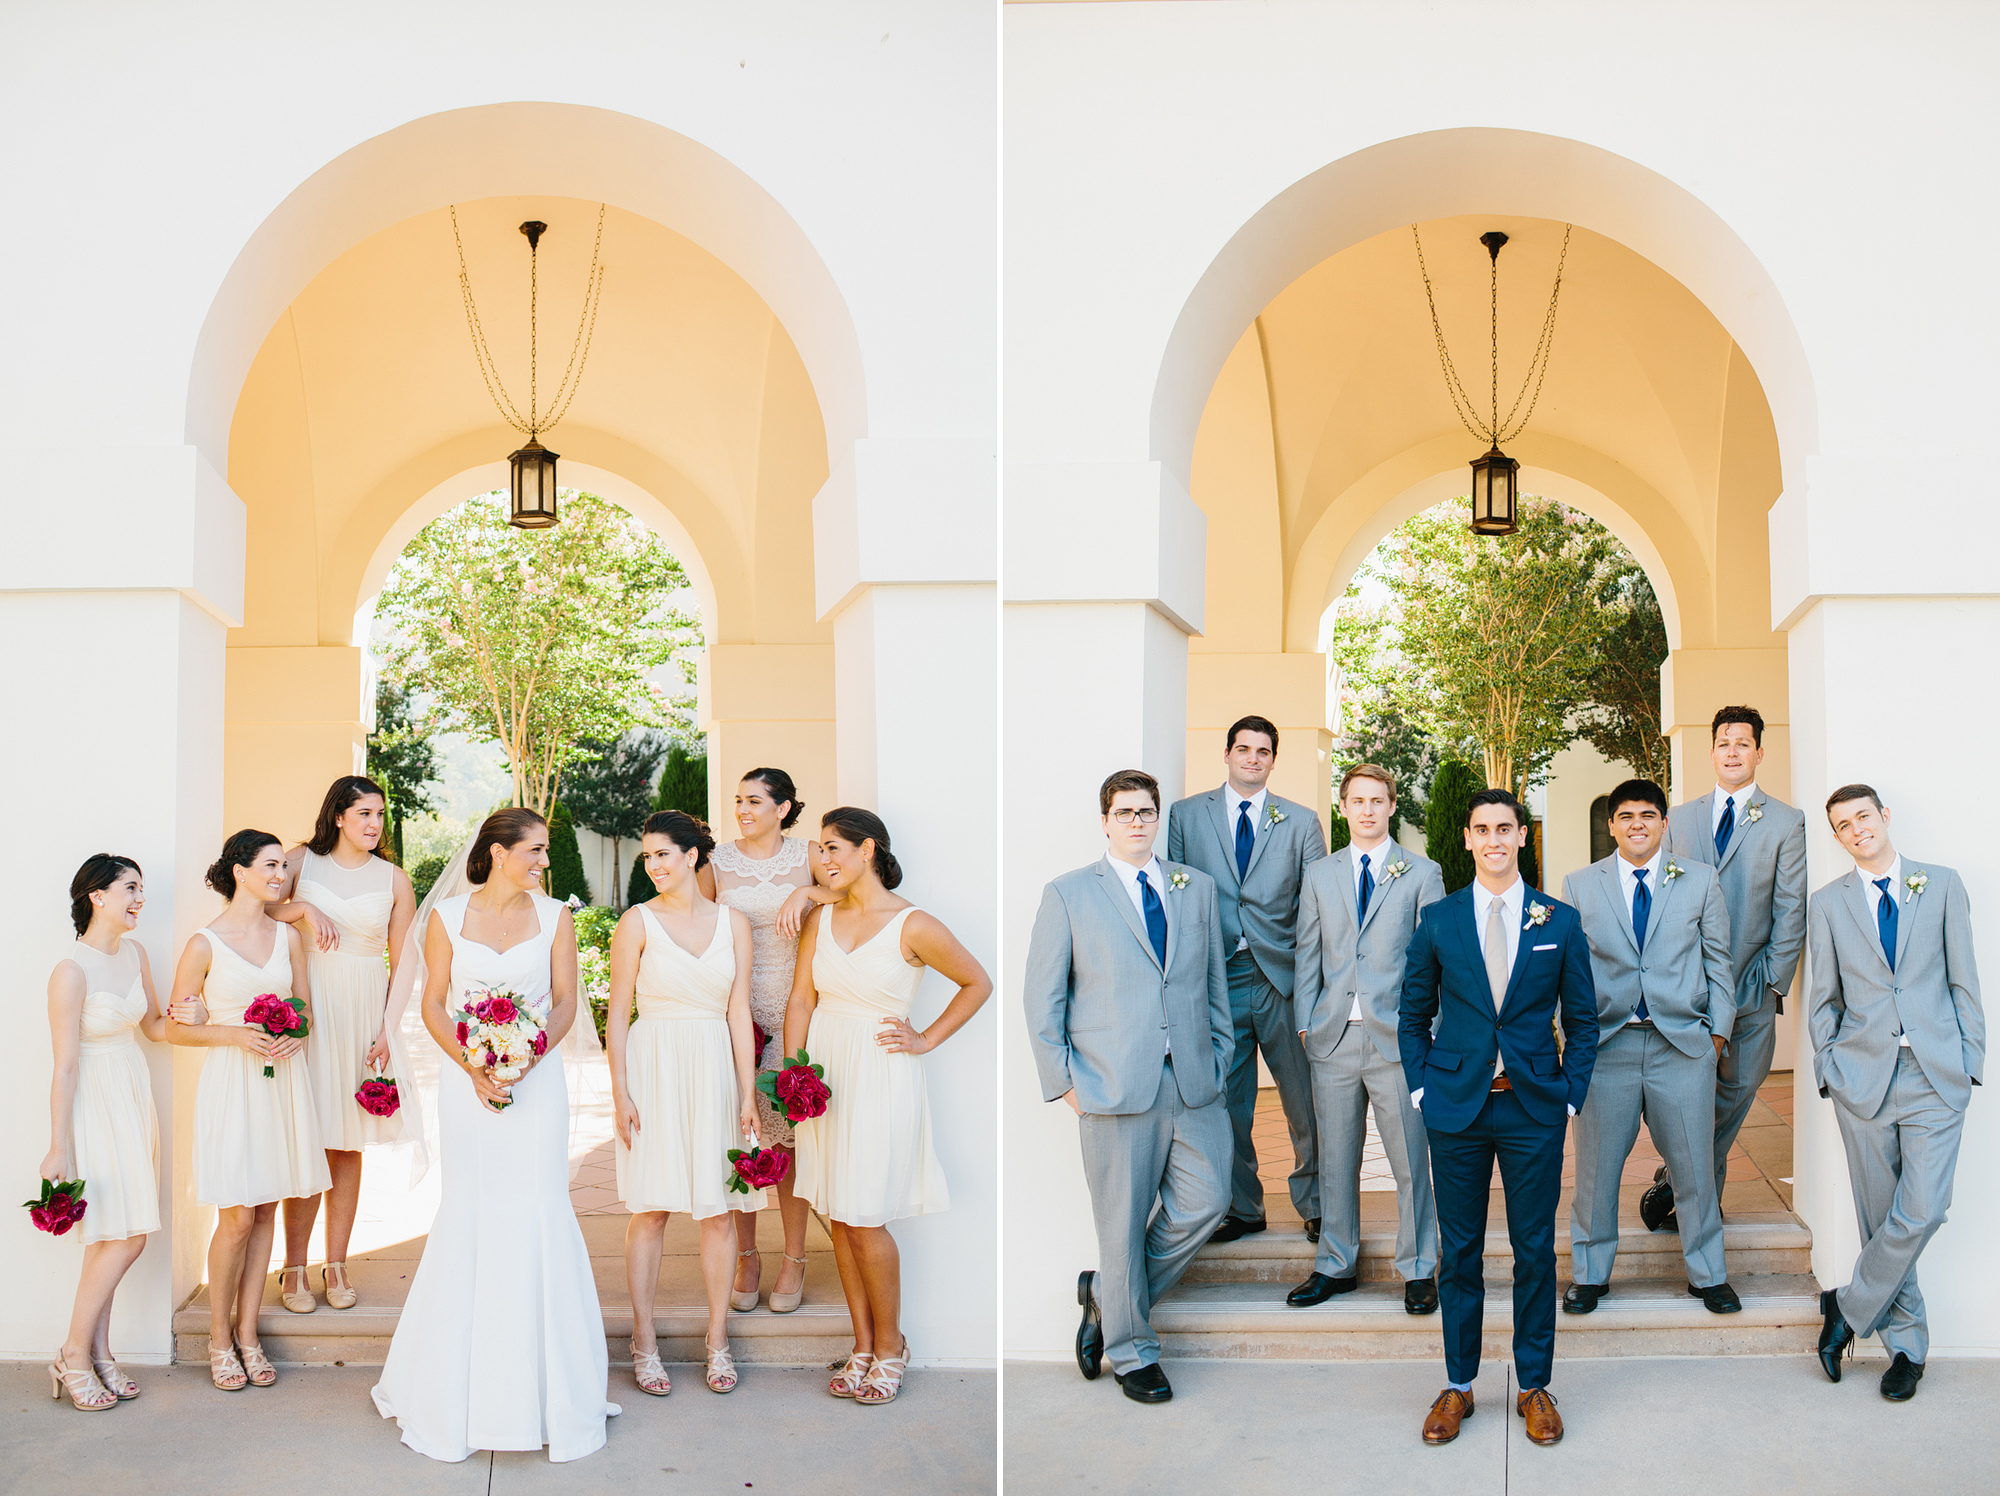 The bridal party in front of arches at the college. 